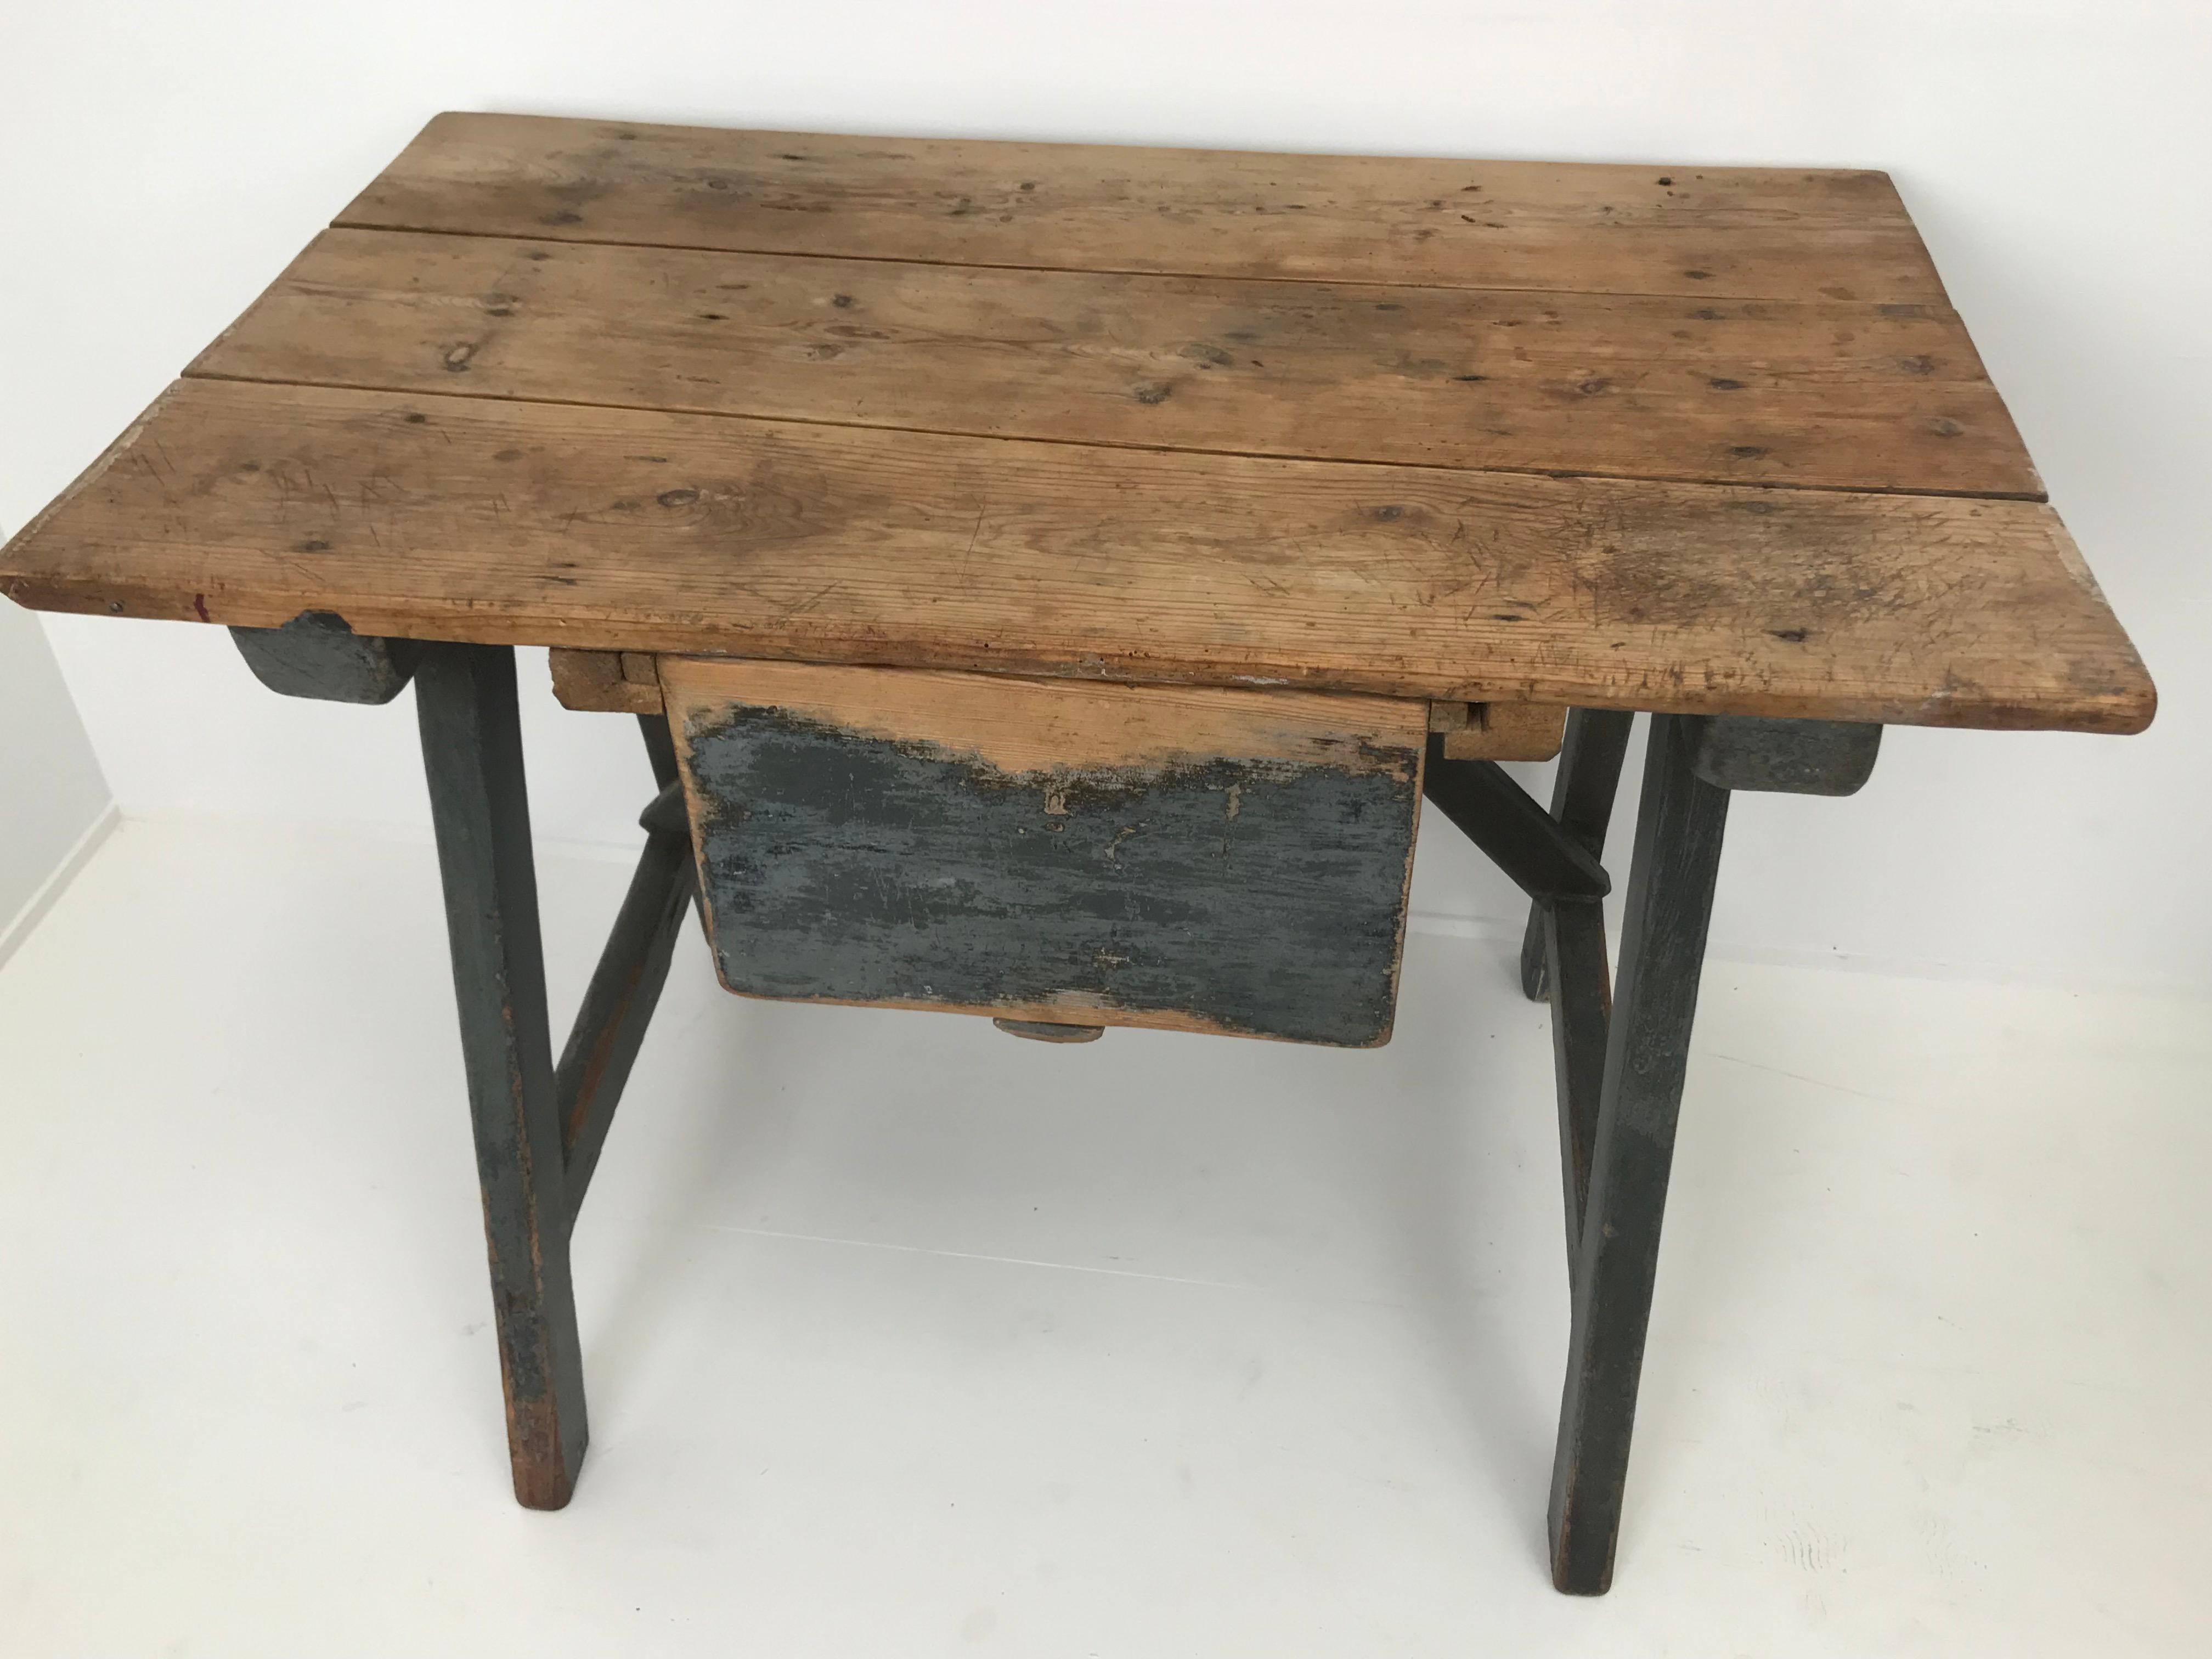 Very decorative Spanish trestle table with blue painted patina,
Zaragoza, 19 th Century,
one drawer,
the table has its original patina and a warm and worn shine,
a table full of charm and authenticity,powerful table